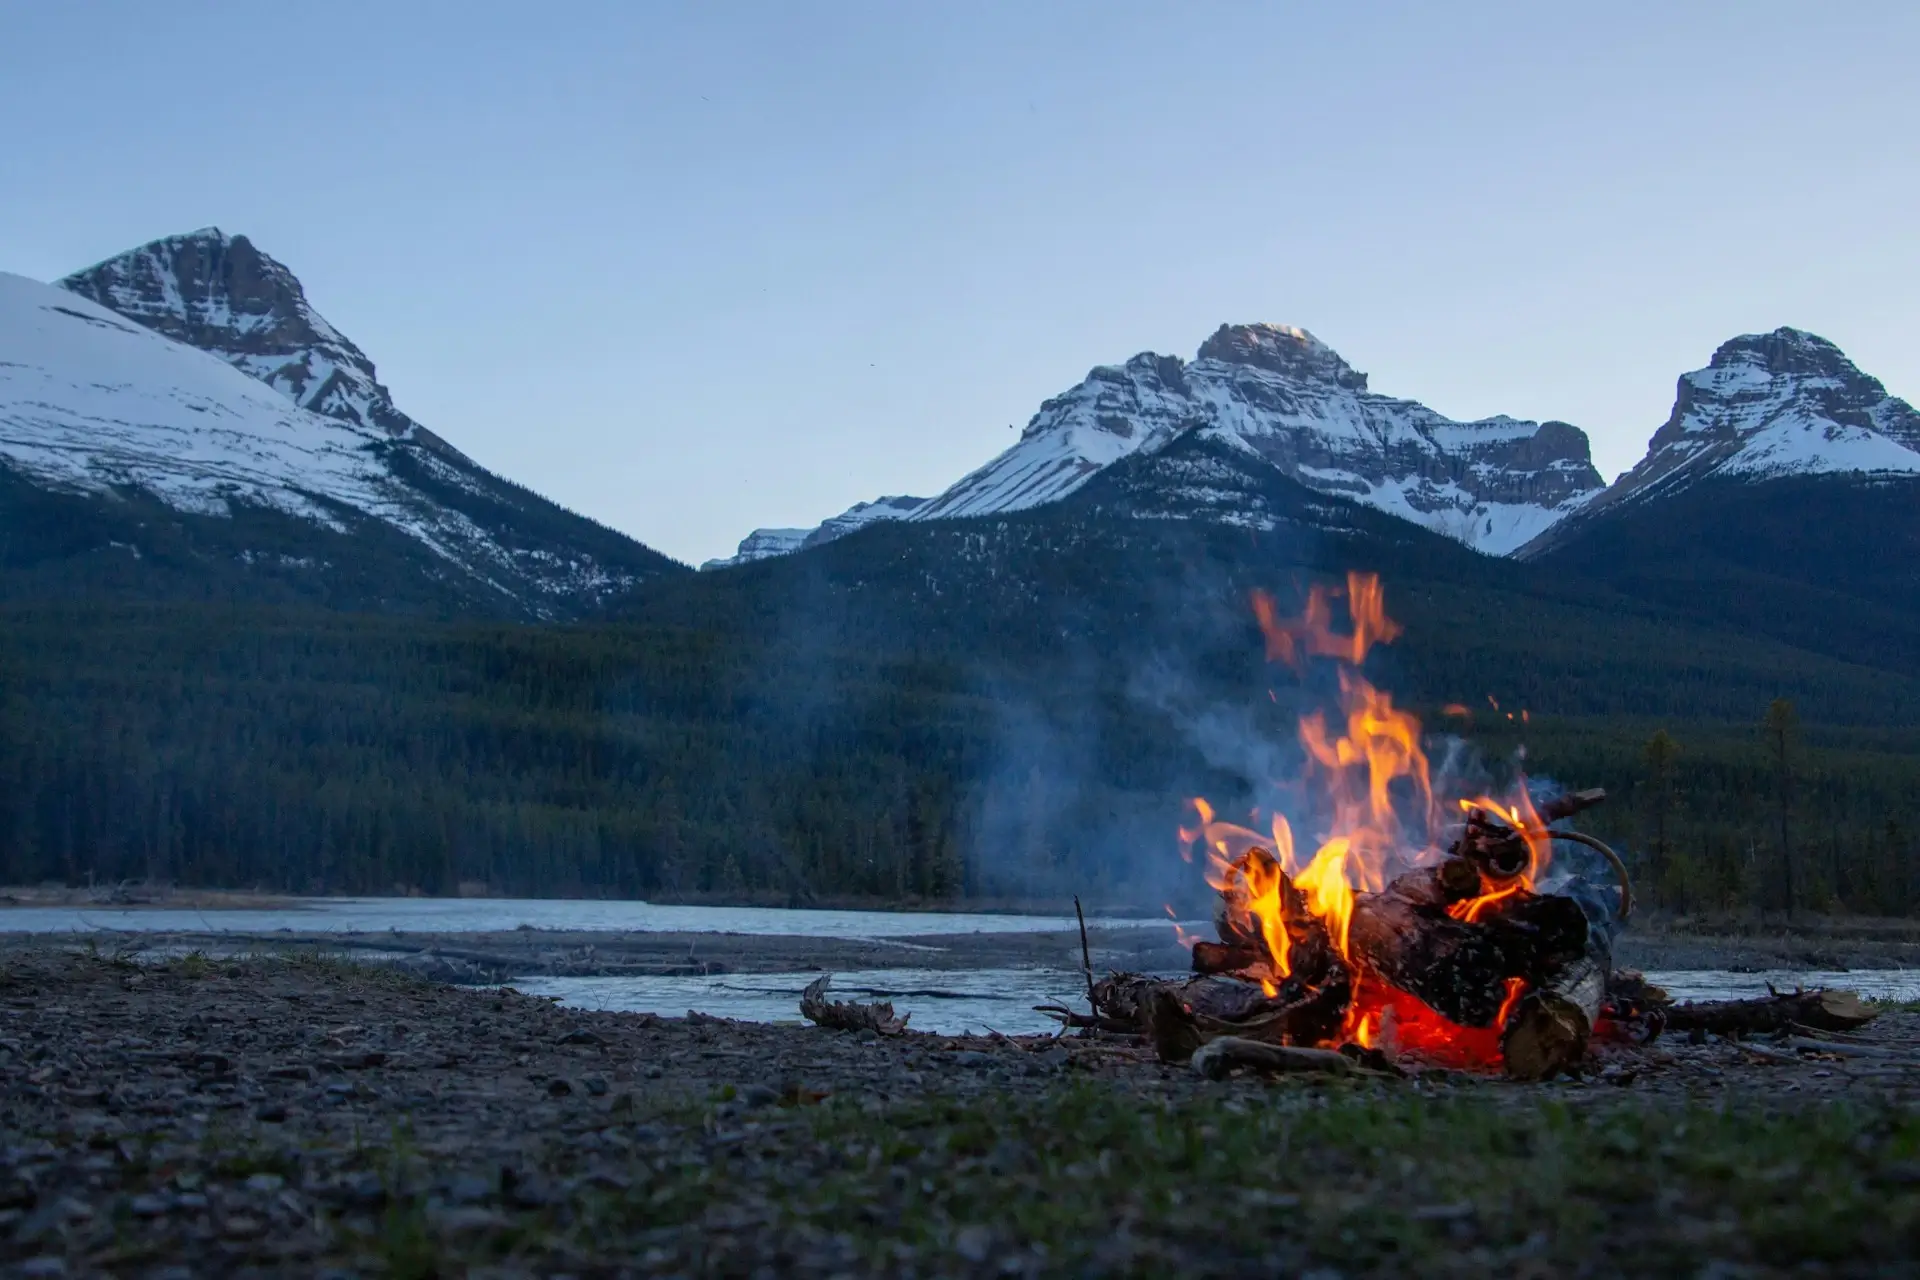 A campfire burning at dusk in front of a glacial mountain backdrop